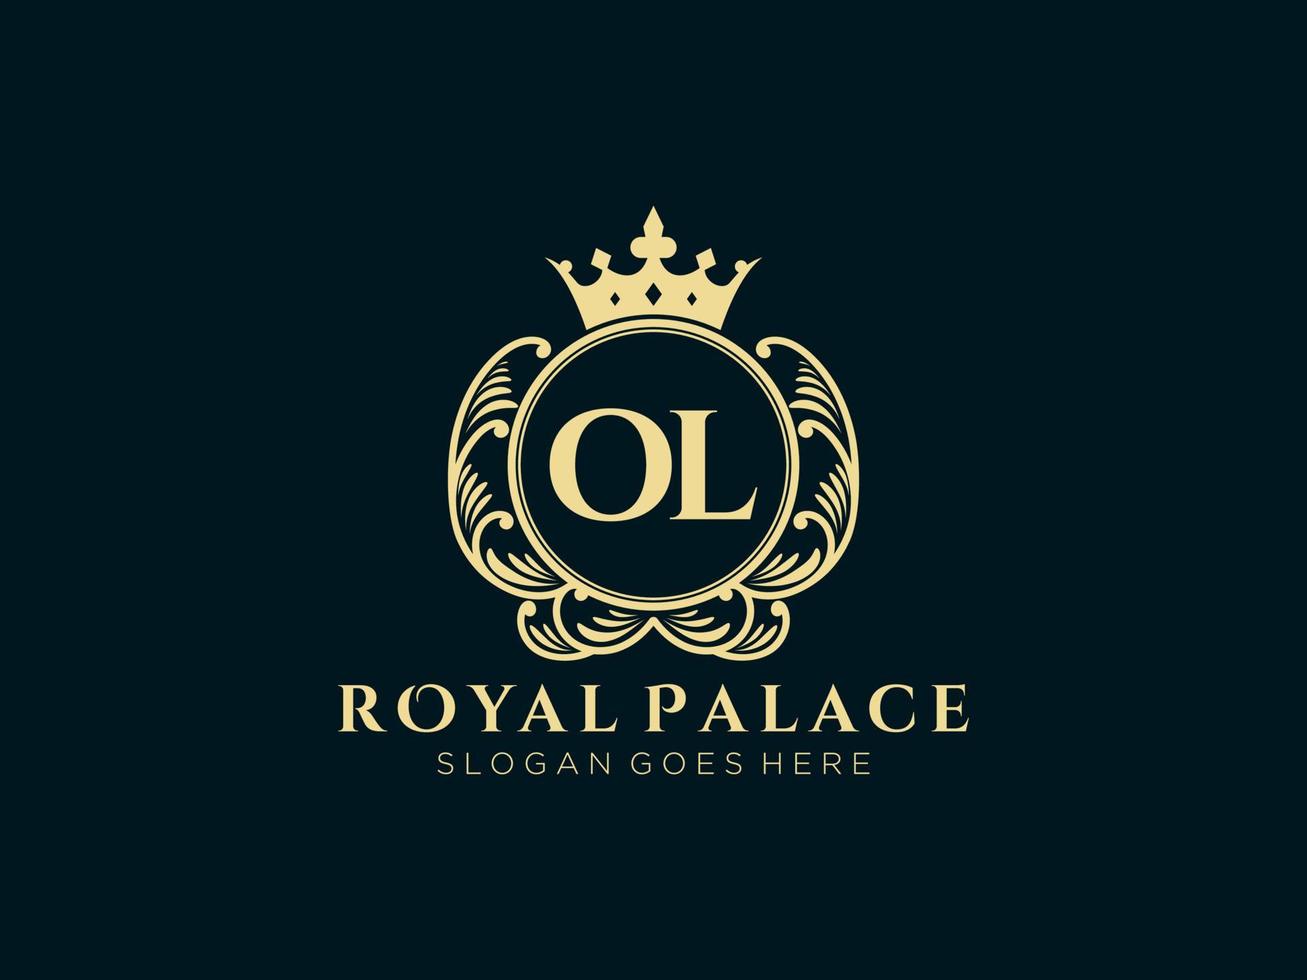 Letter OL Antique royal luxury victorian logo with ornamental frame. vector